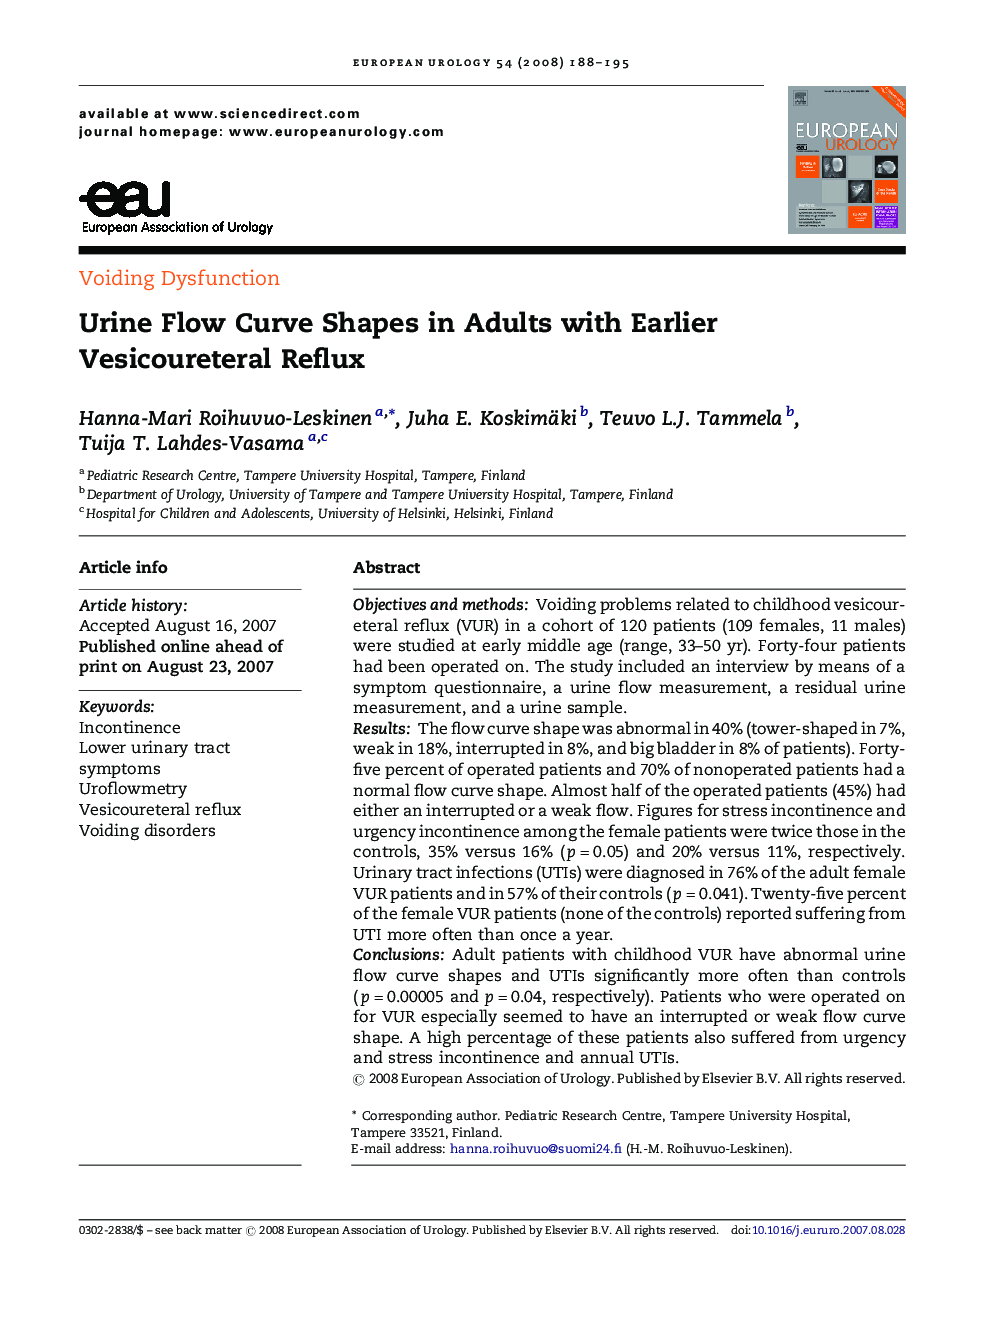 Urine Flow Curve Shapes in Adults with Earlier Vesicoureteral Reflux